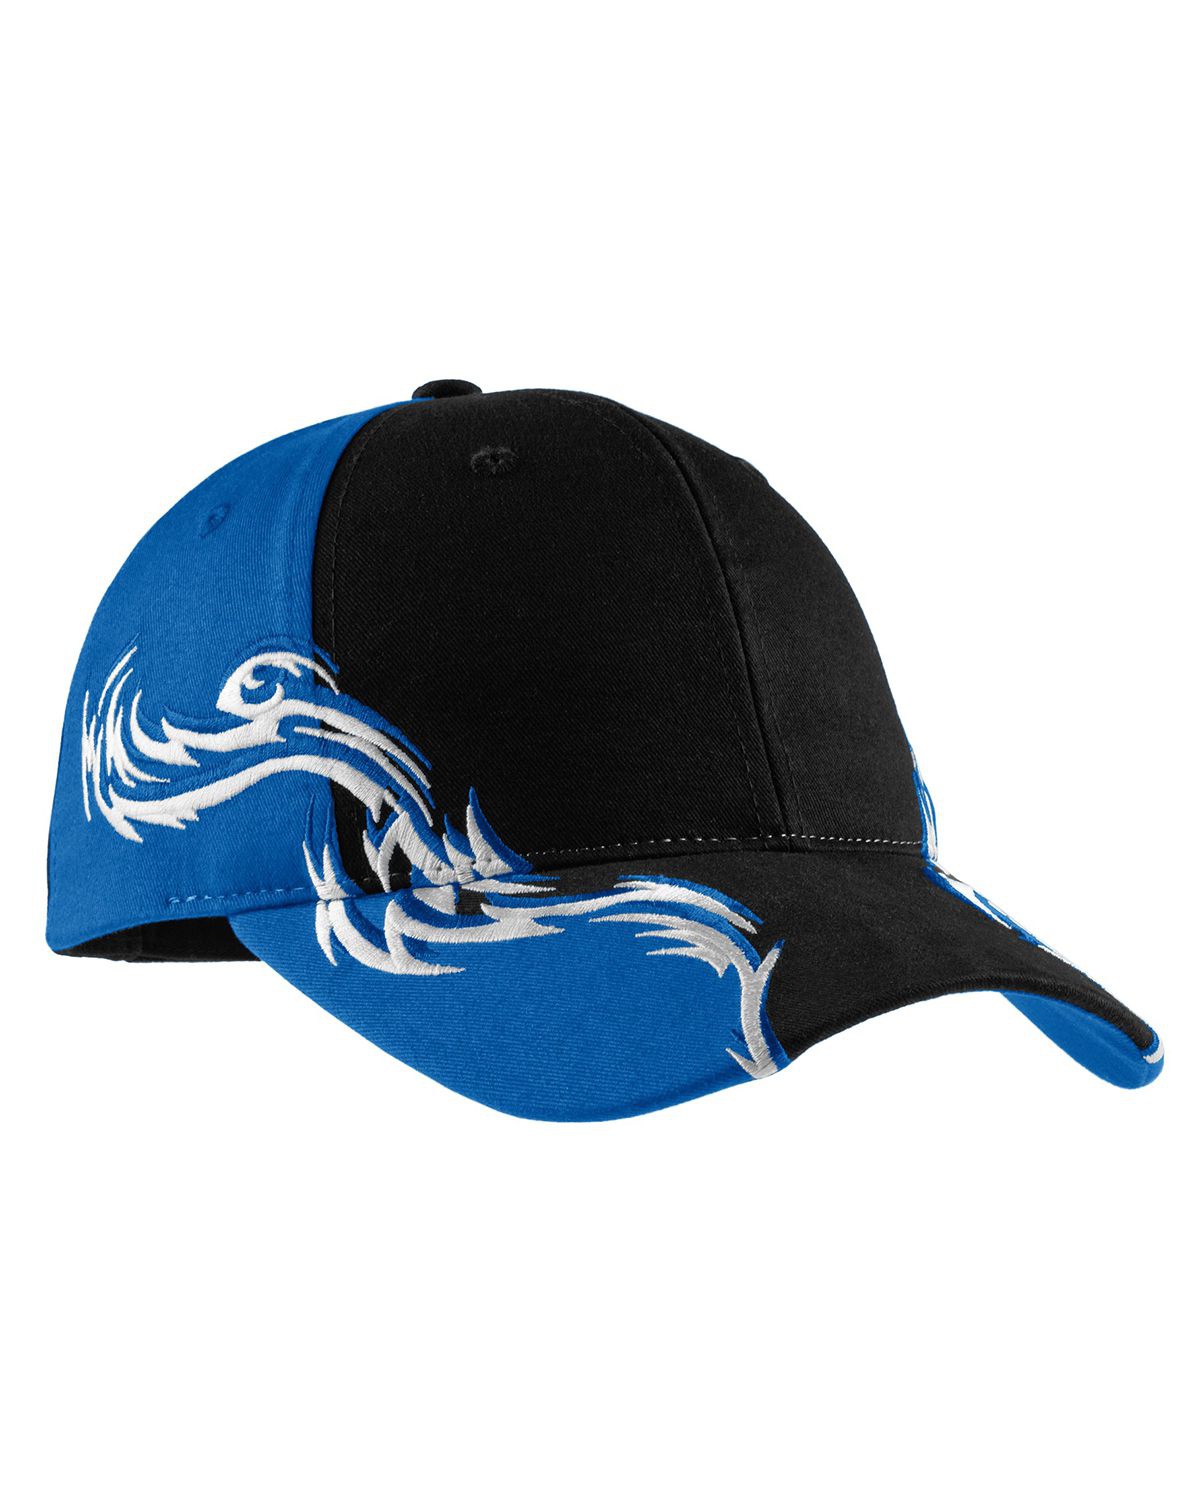 'Port Authority C859 Adult Racing Cap with Red and White Flames'